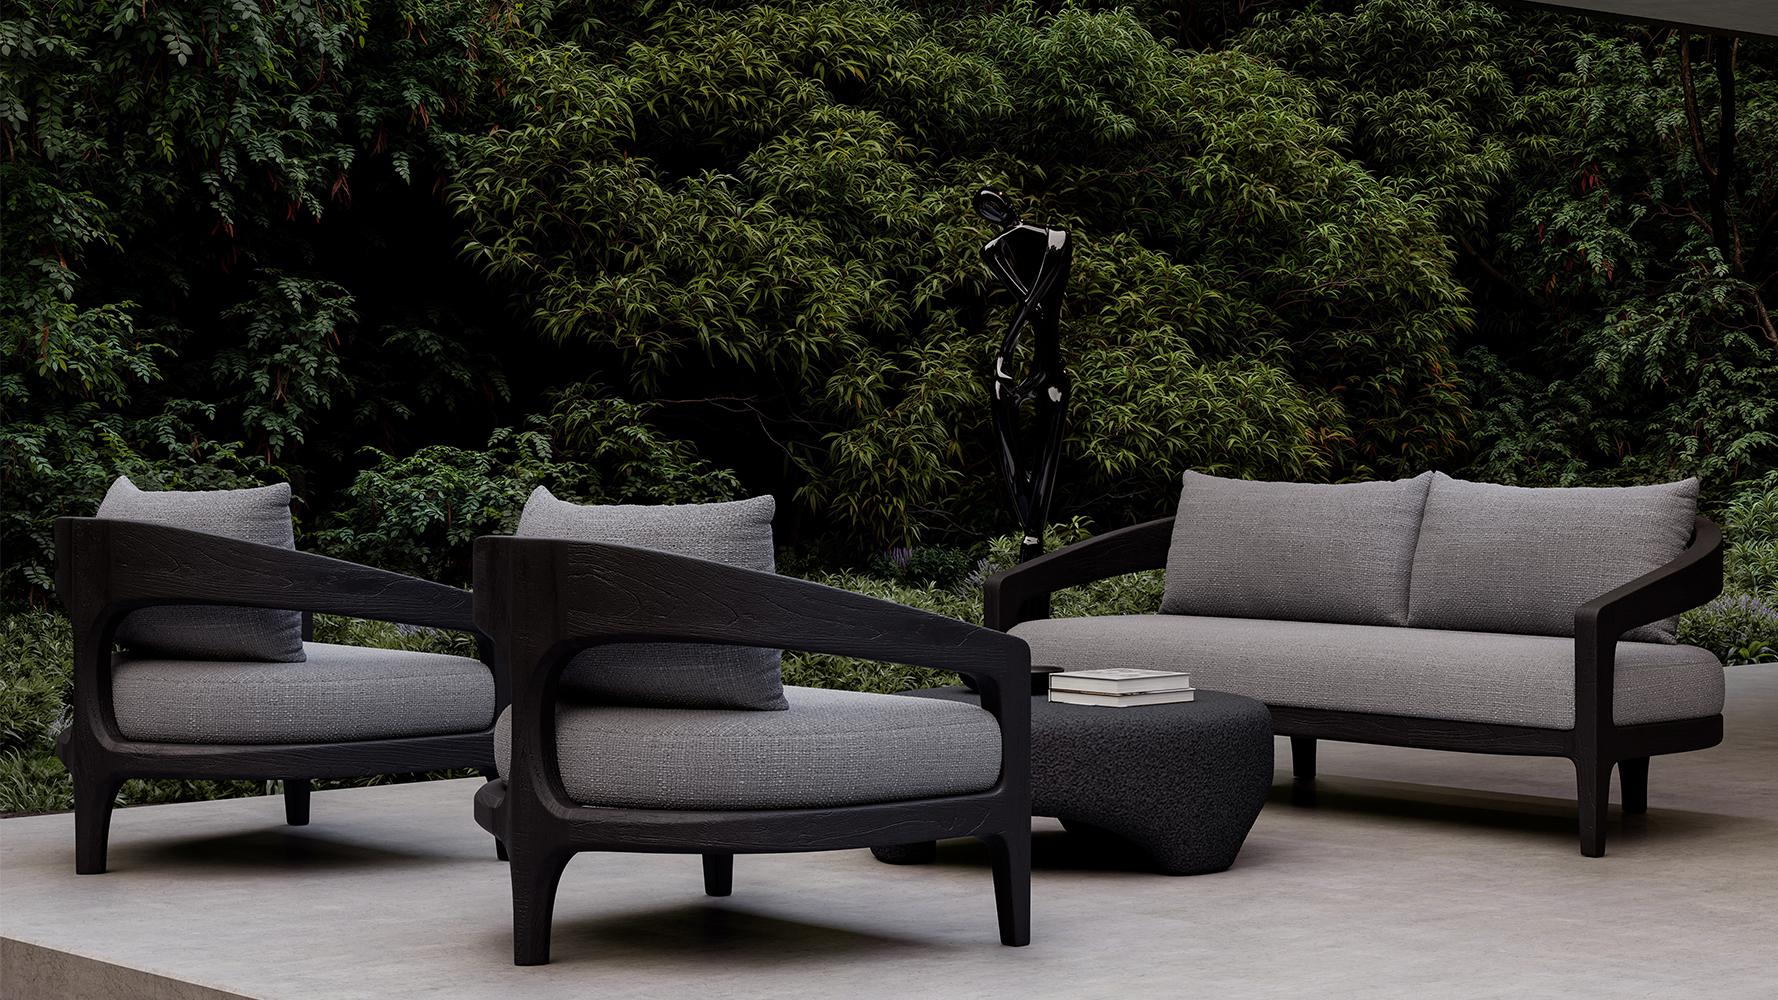 Contemporary Whale-noche Outdoor 2 Seater Sofa by SNOC For Sale